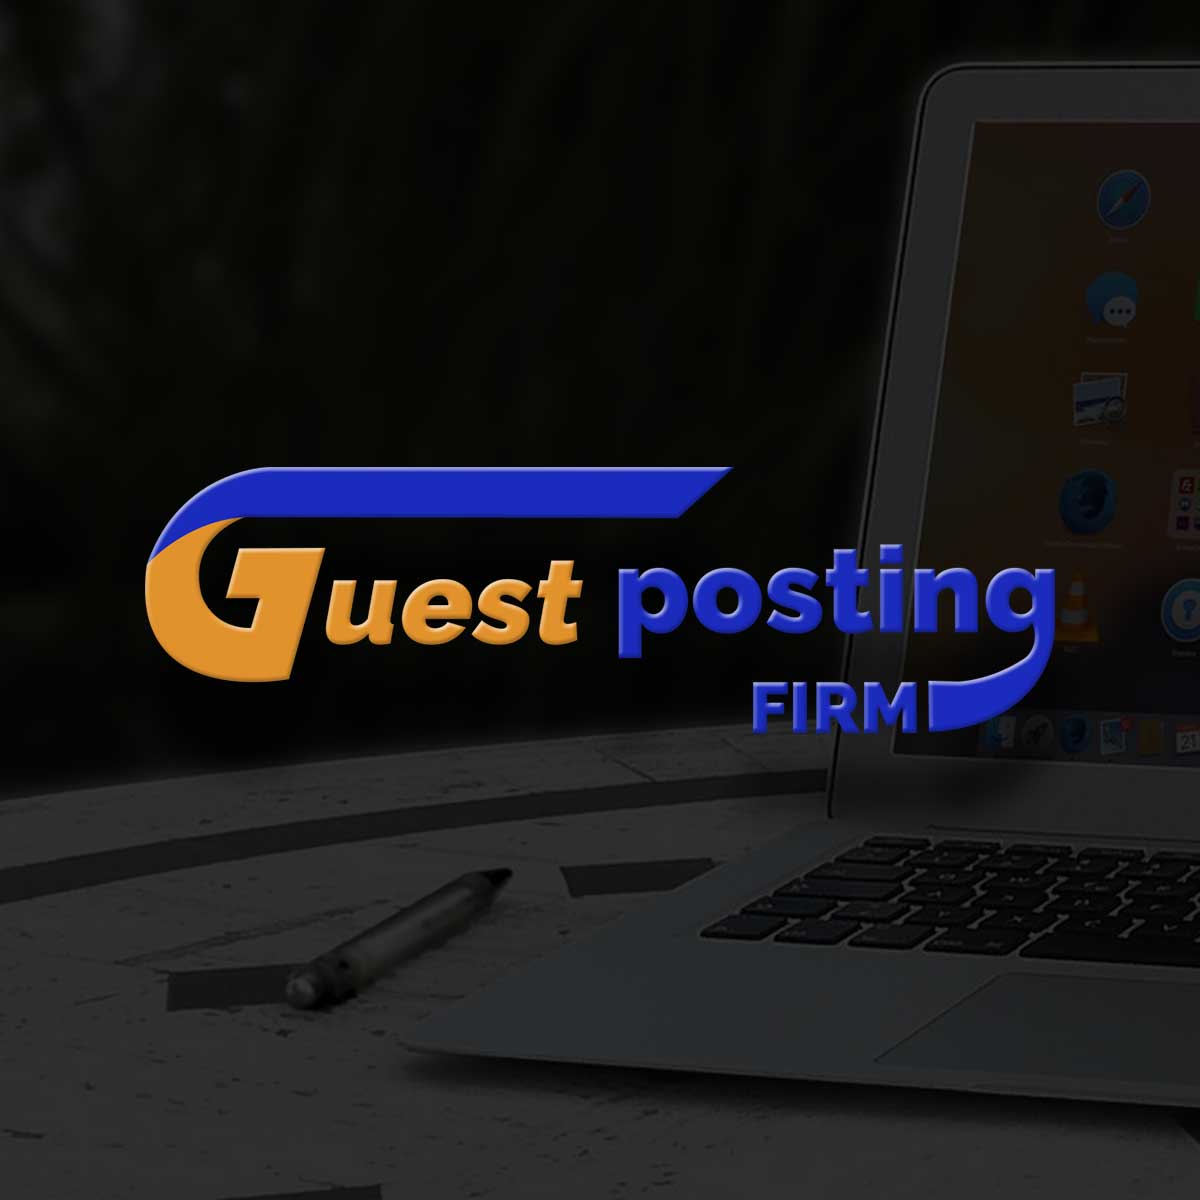 Guest-Posting-firm